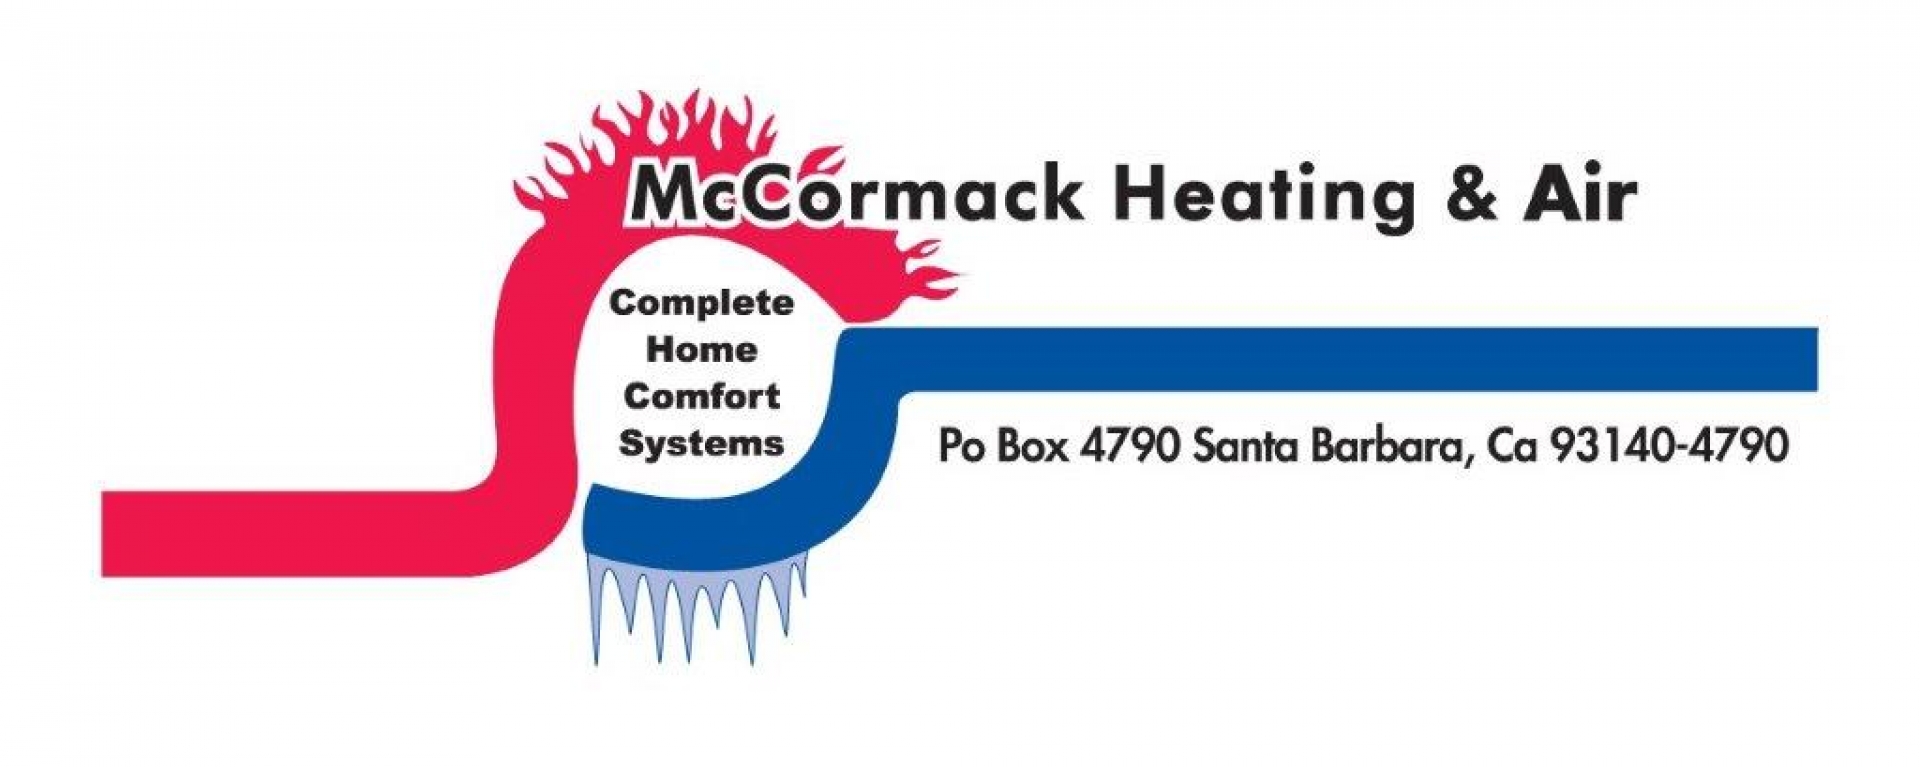 McCormack Heating & Air Conditioning company logo